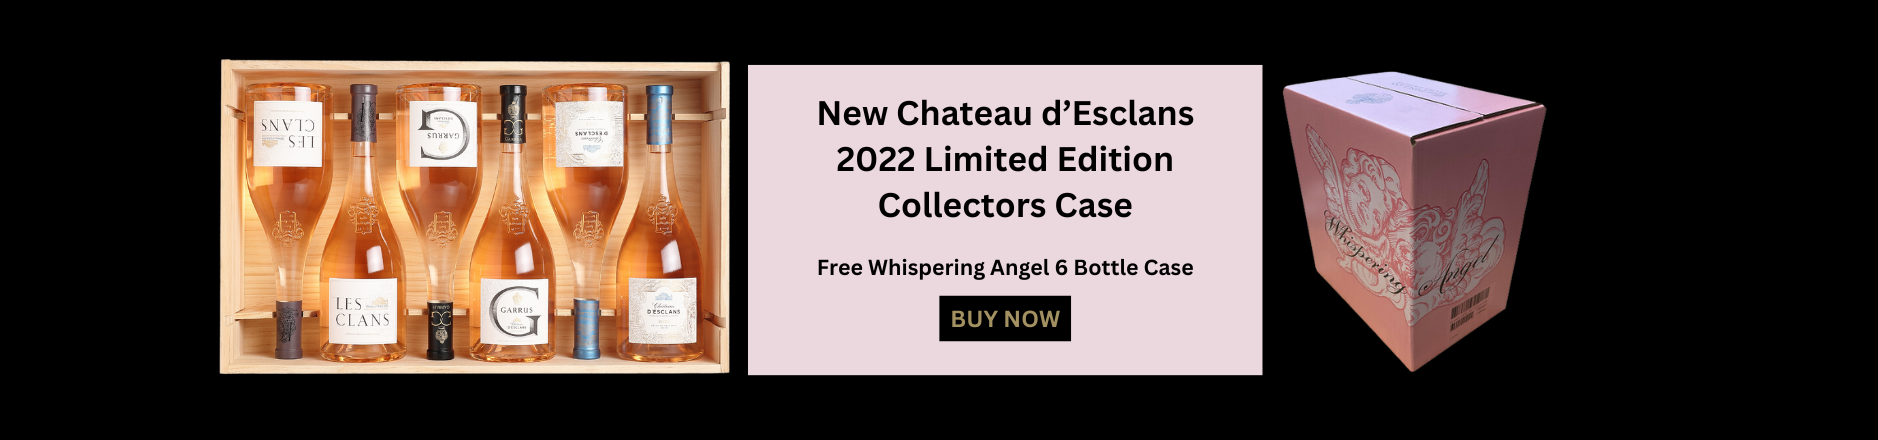 FINE WINES - New Chateau d’Esclans 2022 Limited Edition Collectors Case + Free Whispering Angel 6 Bottle Case